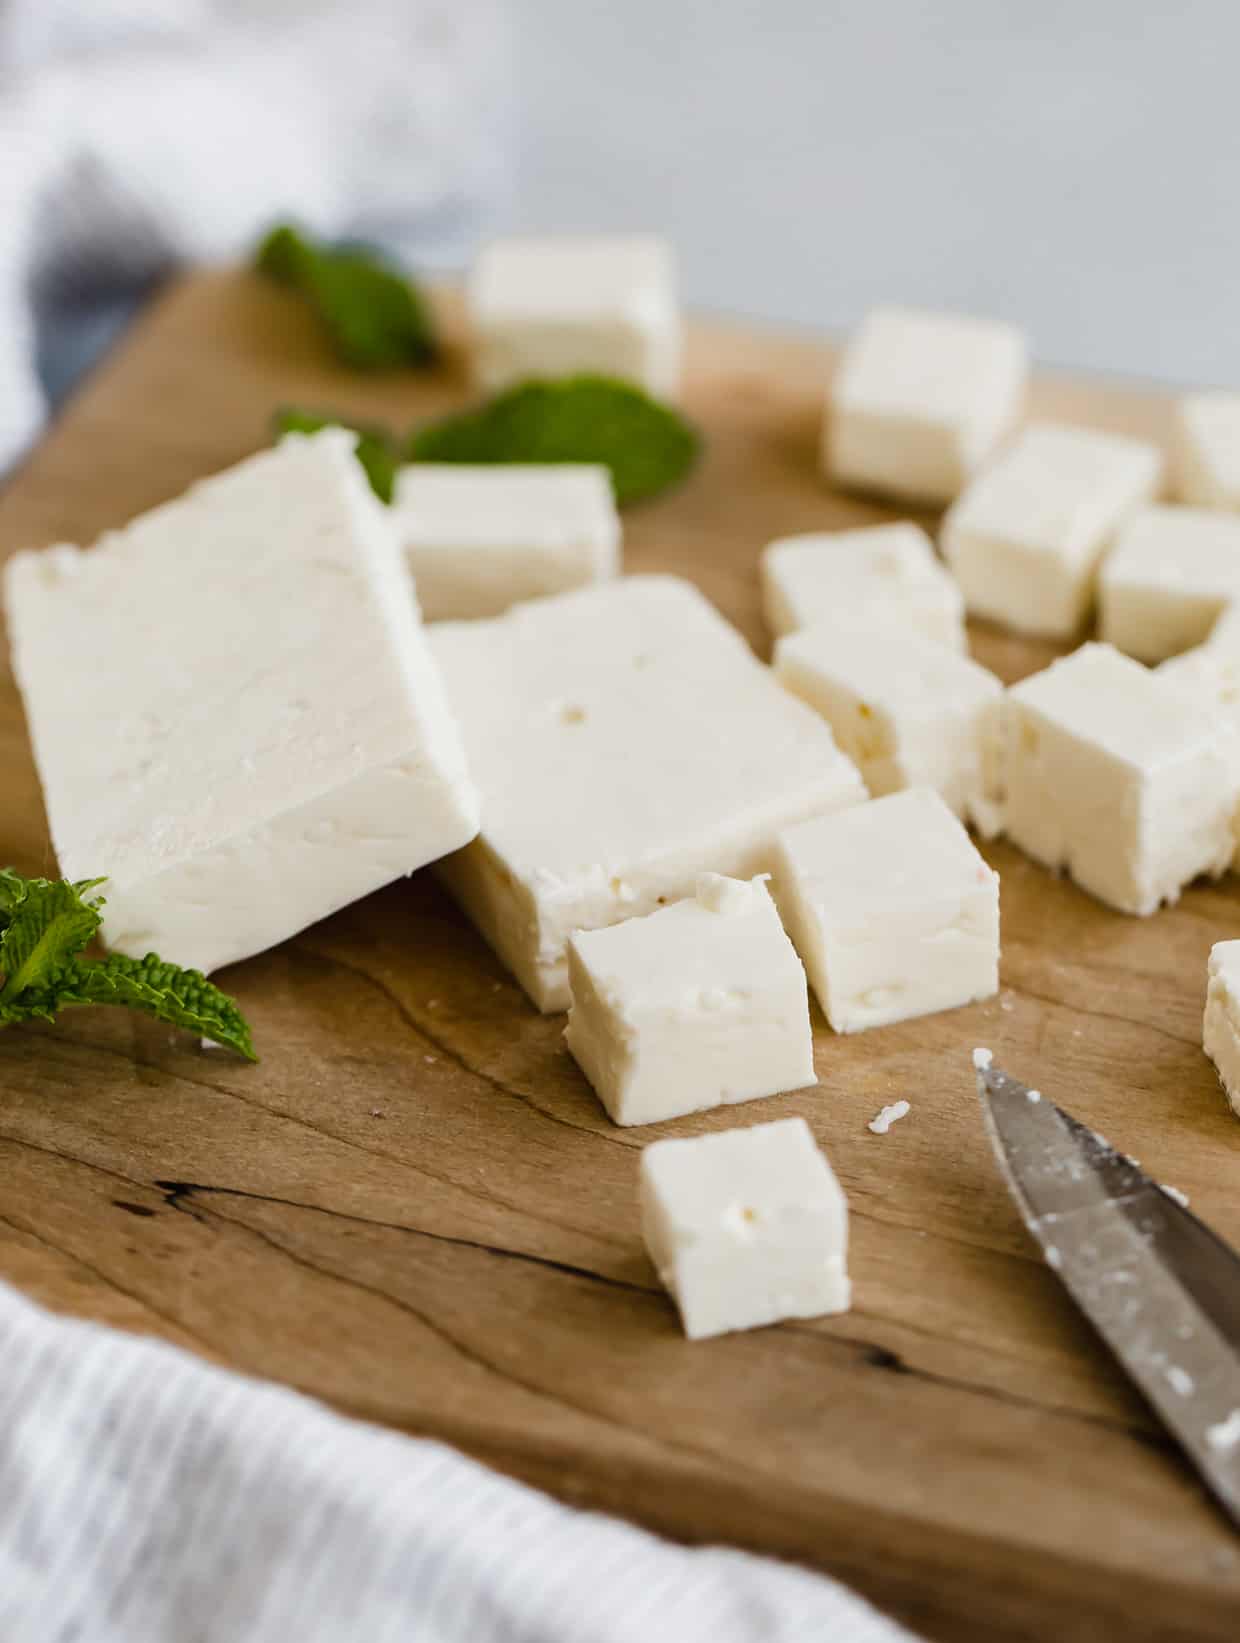 Close up photo of feta cheese on a wooden cutting board cut into small squares.